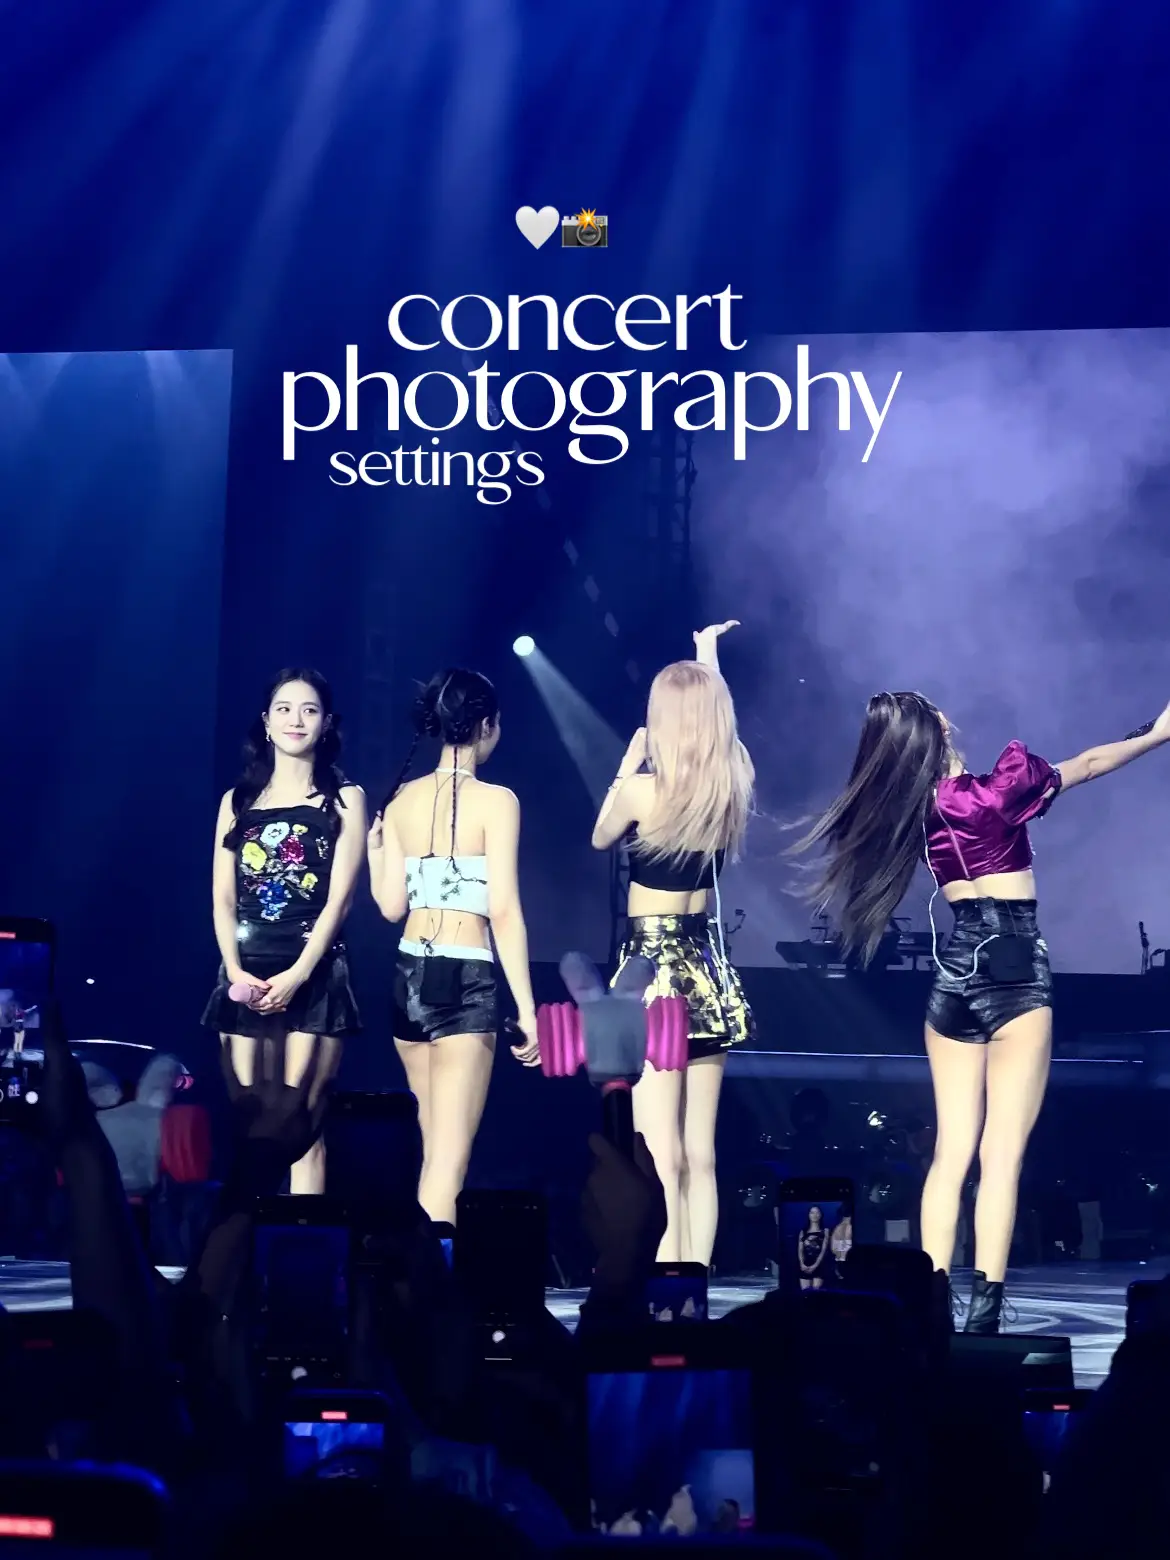 BLACKPINK's Jennie Not Wearing a Bra on Their Singapore Concert Soundcheck  Catches Attention